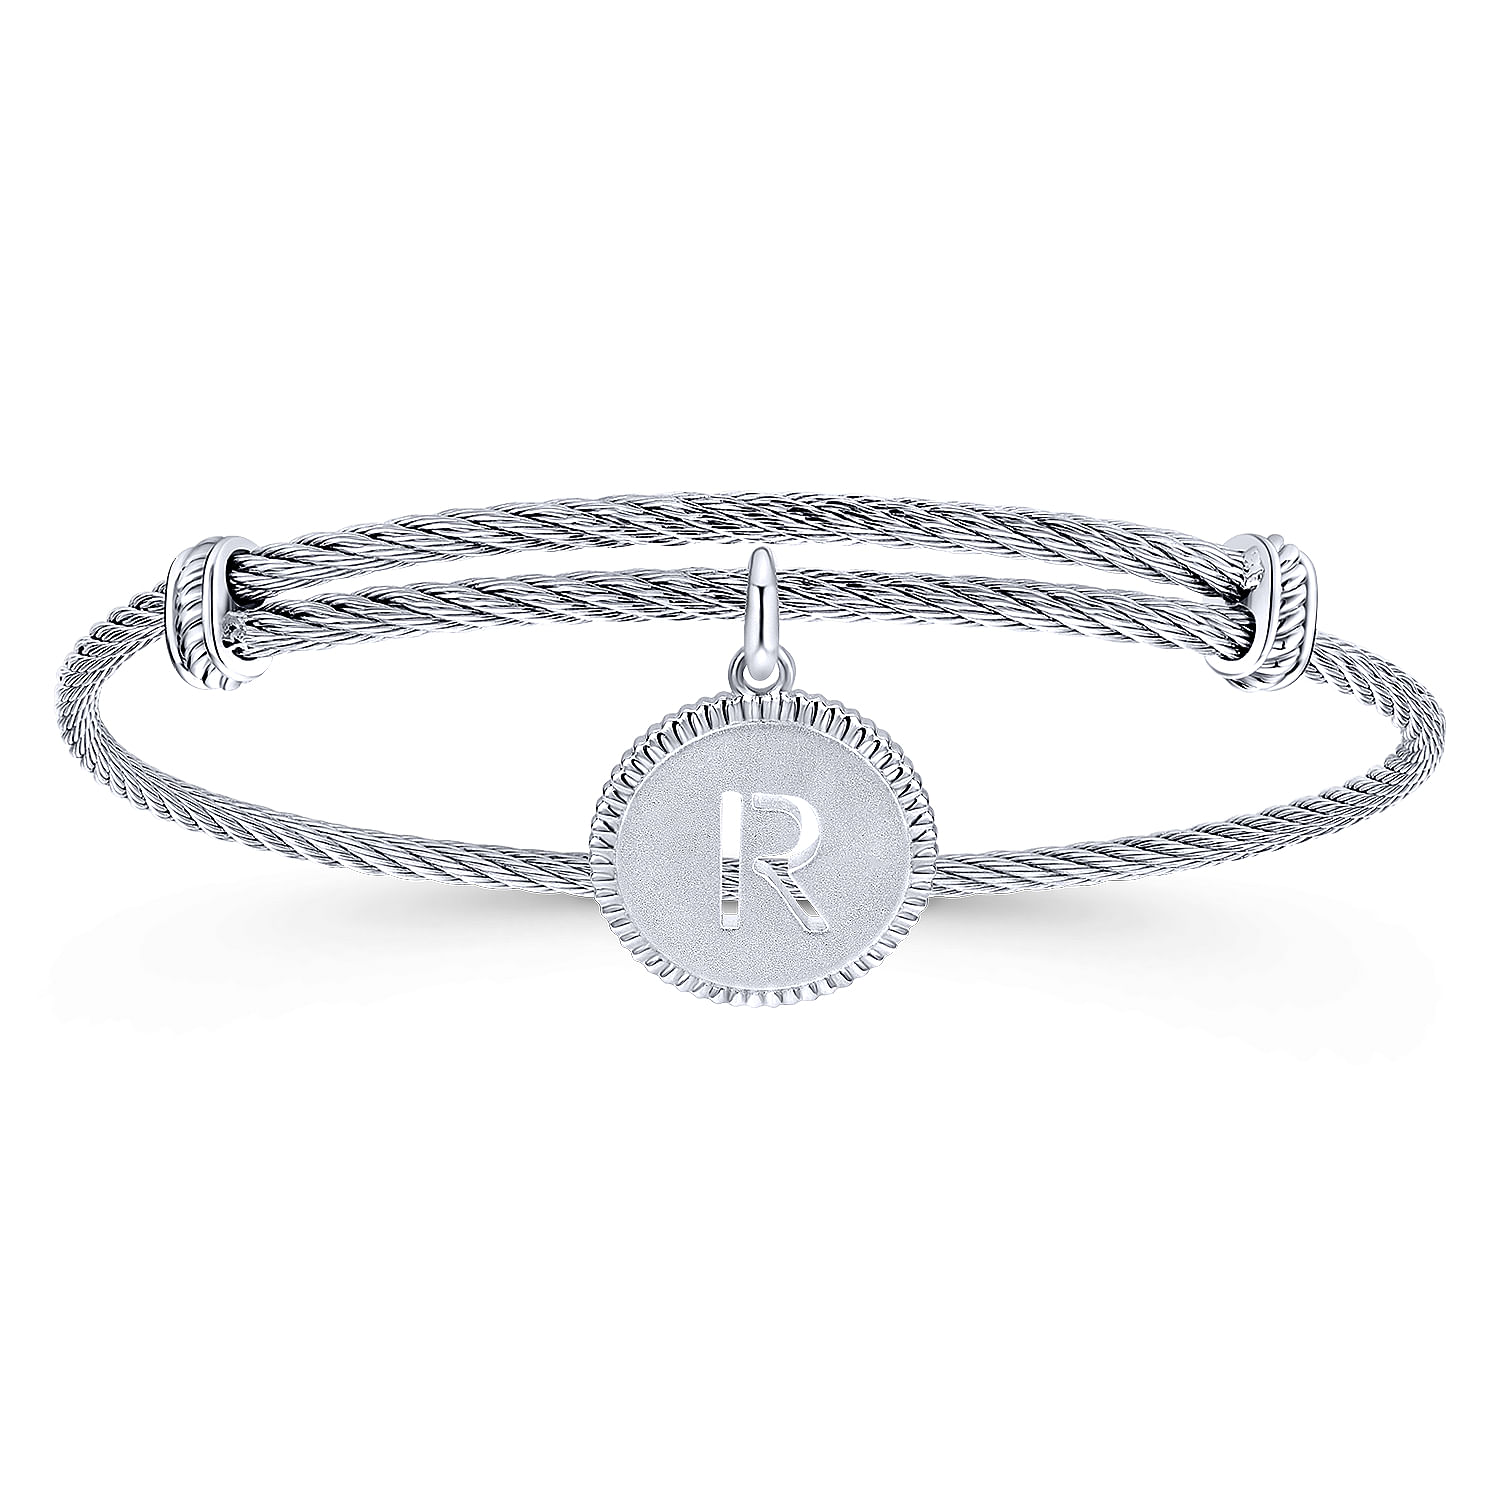 Adjustable Twisted Cable Stainless Steel Bangle with Sterling Silver R Initial Charm